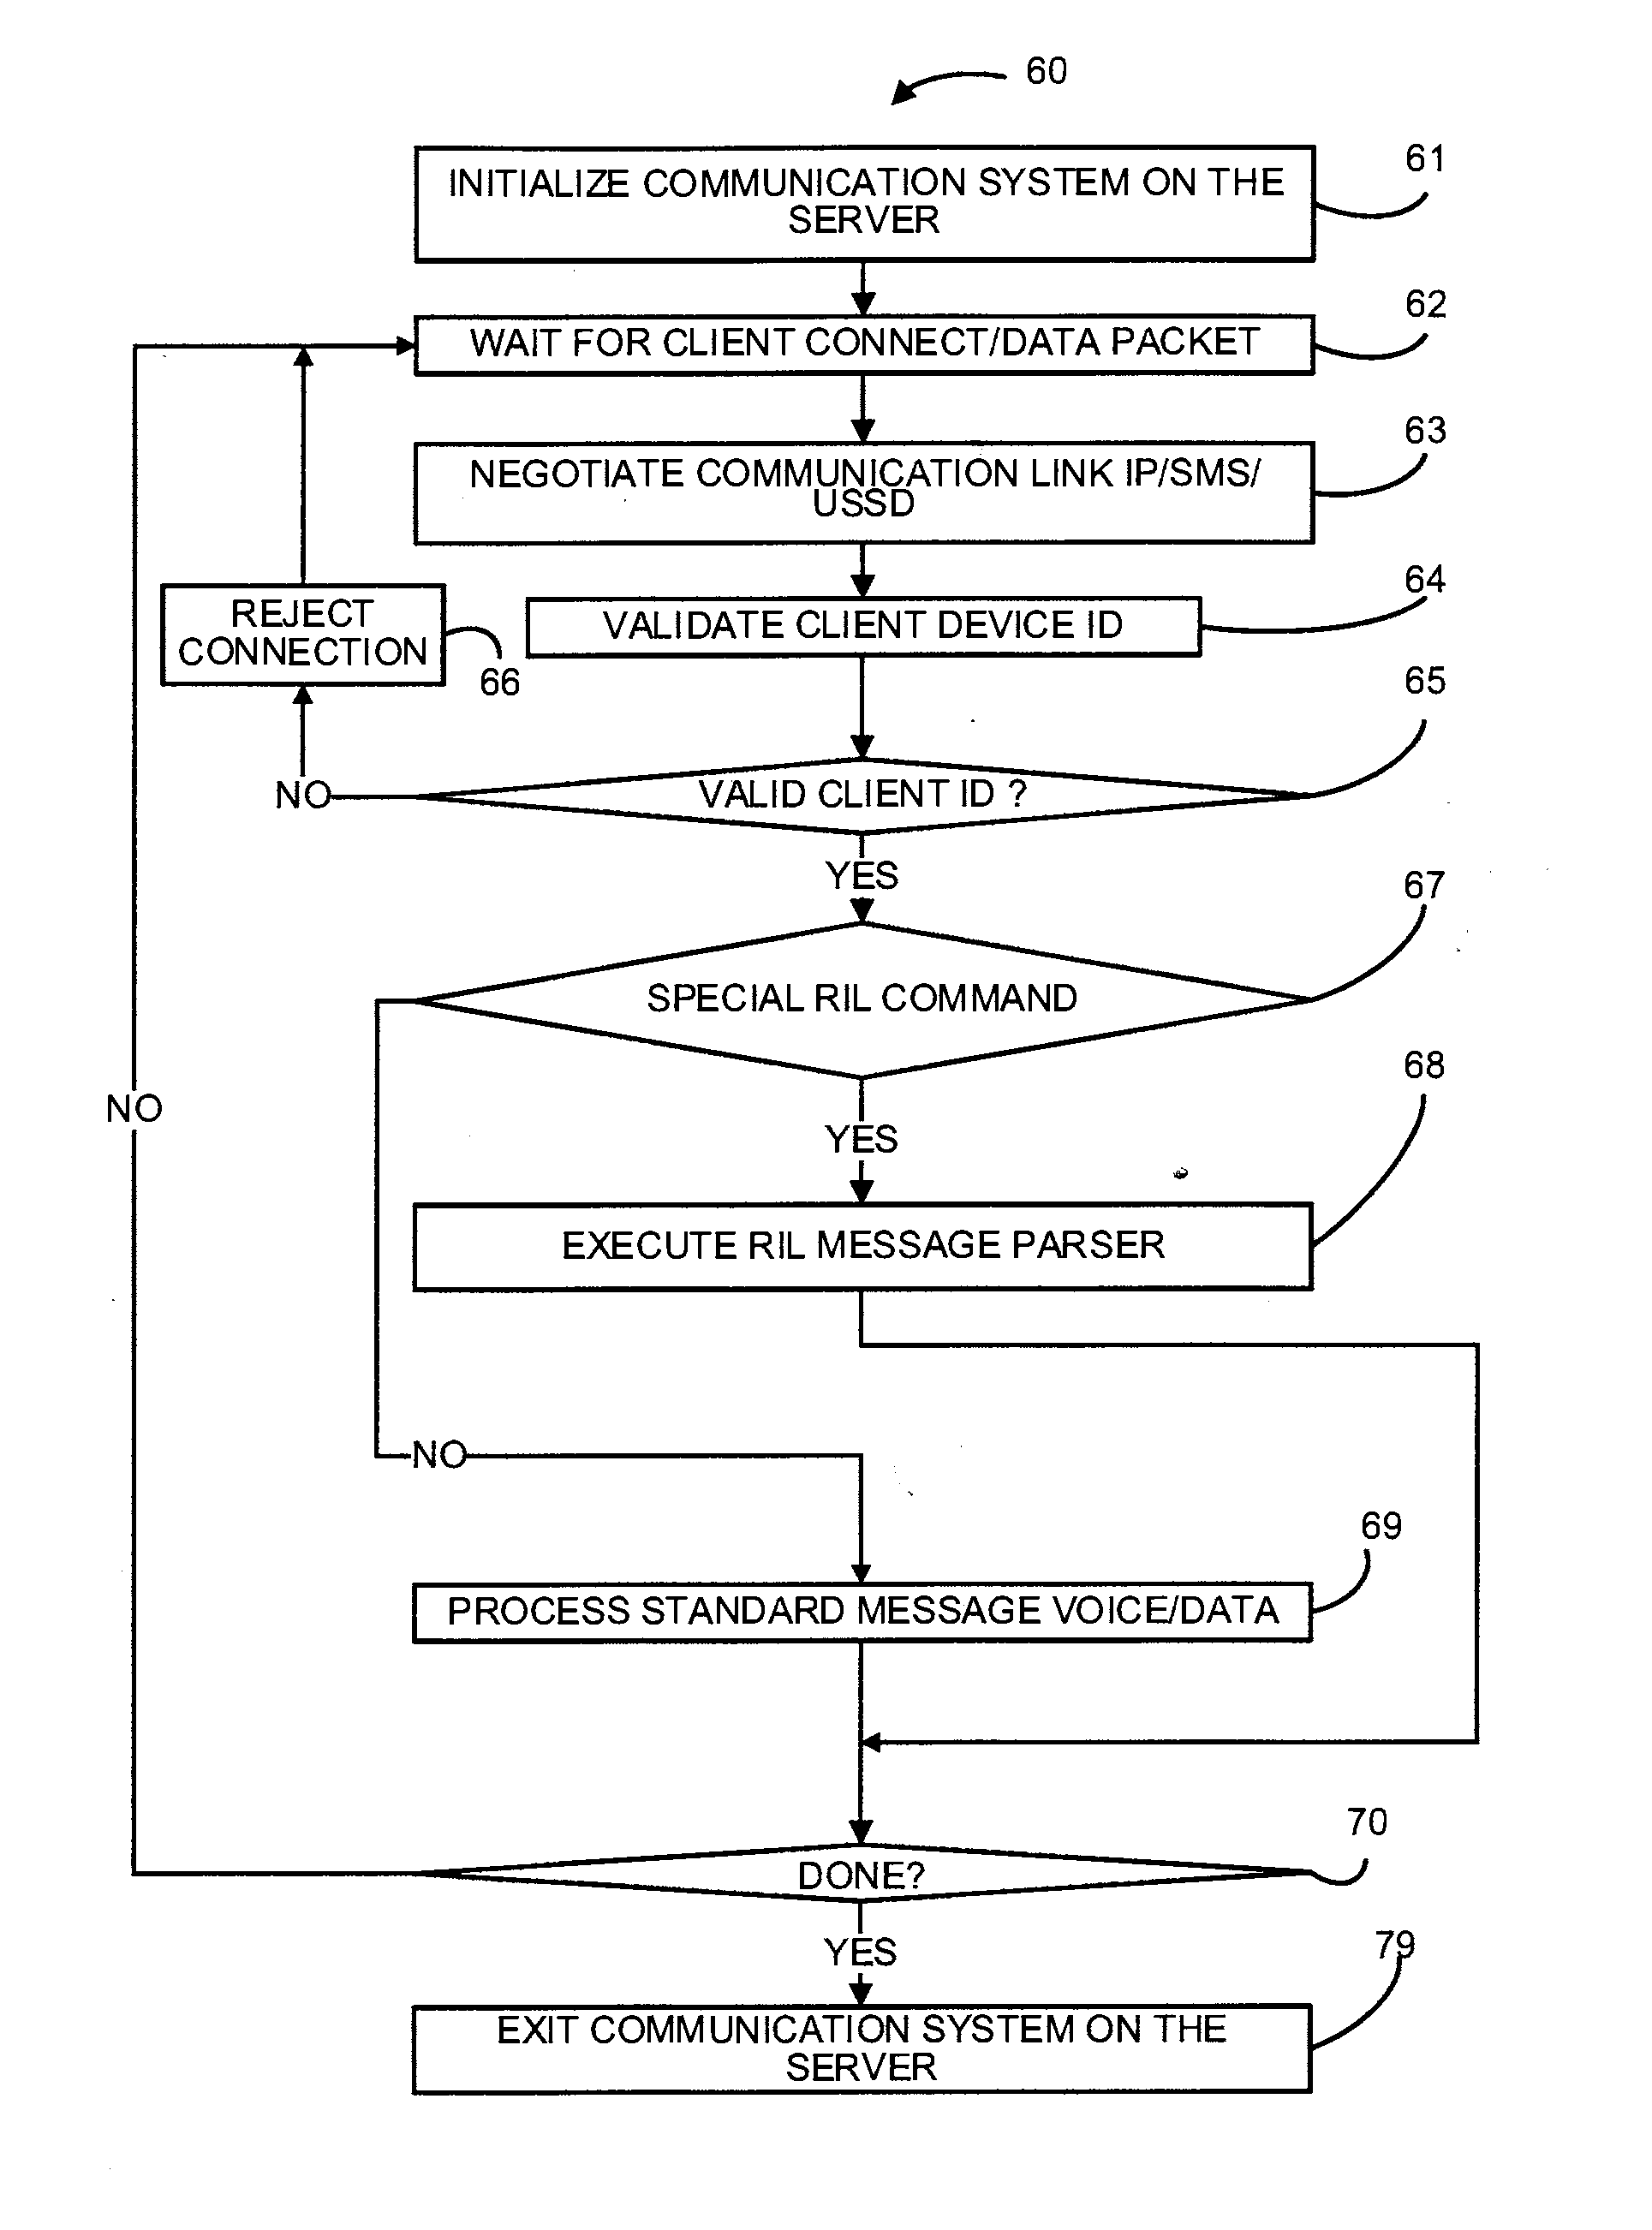 Using Radio Interface Layer (RIL) Protocol to Manage, Control and Communicate with Remote Devices